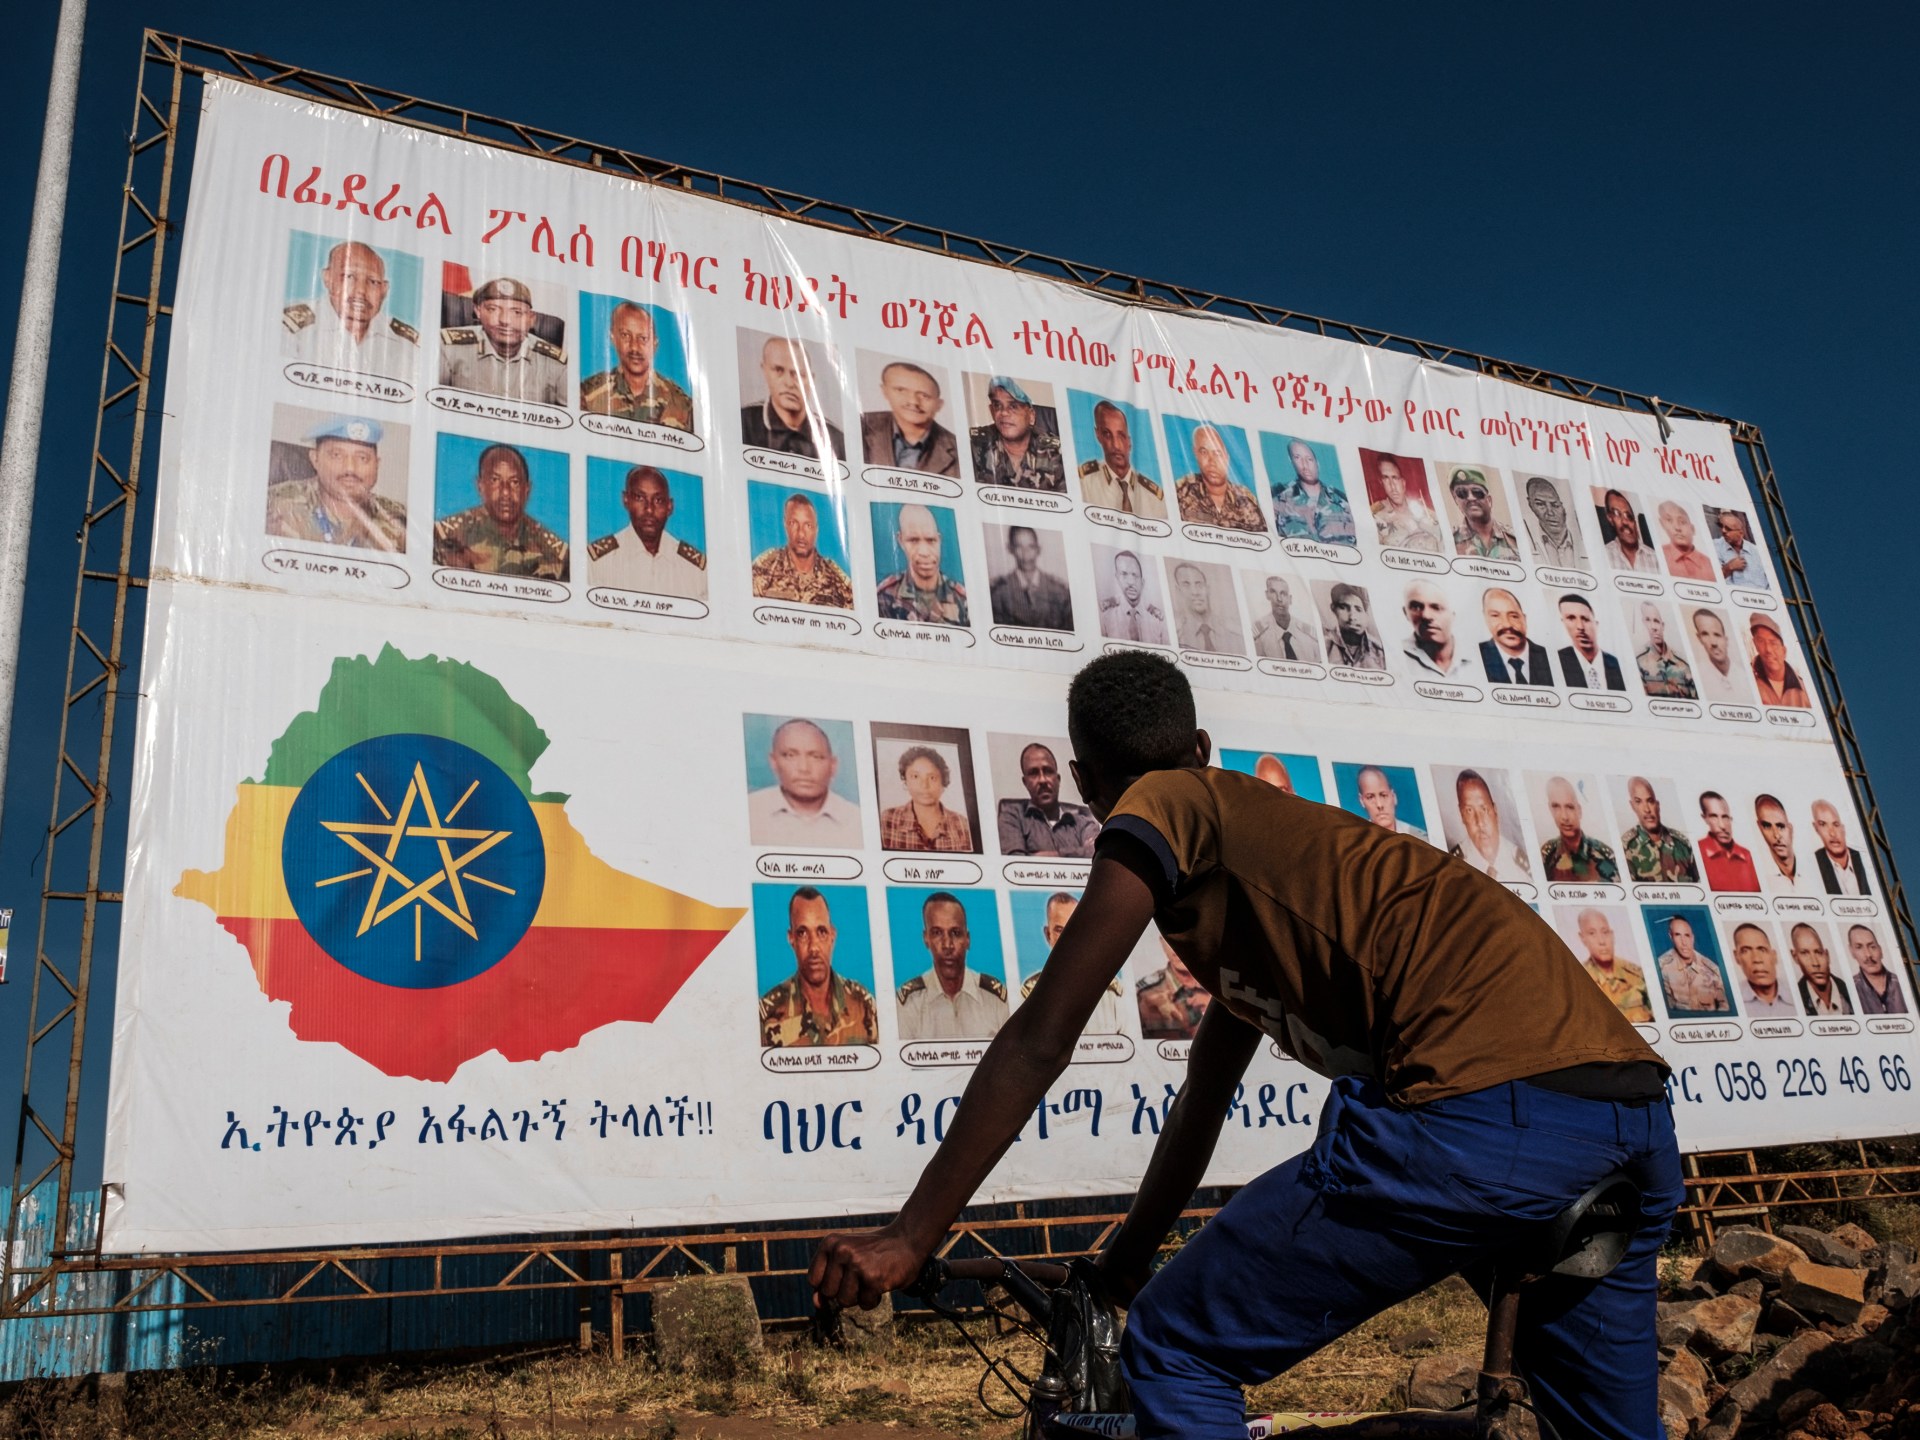 Tigray forces in Ethiopia say 65% of fighters have left frontline